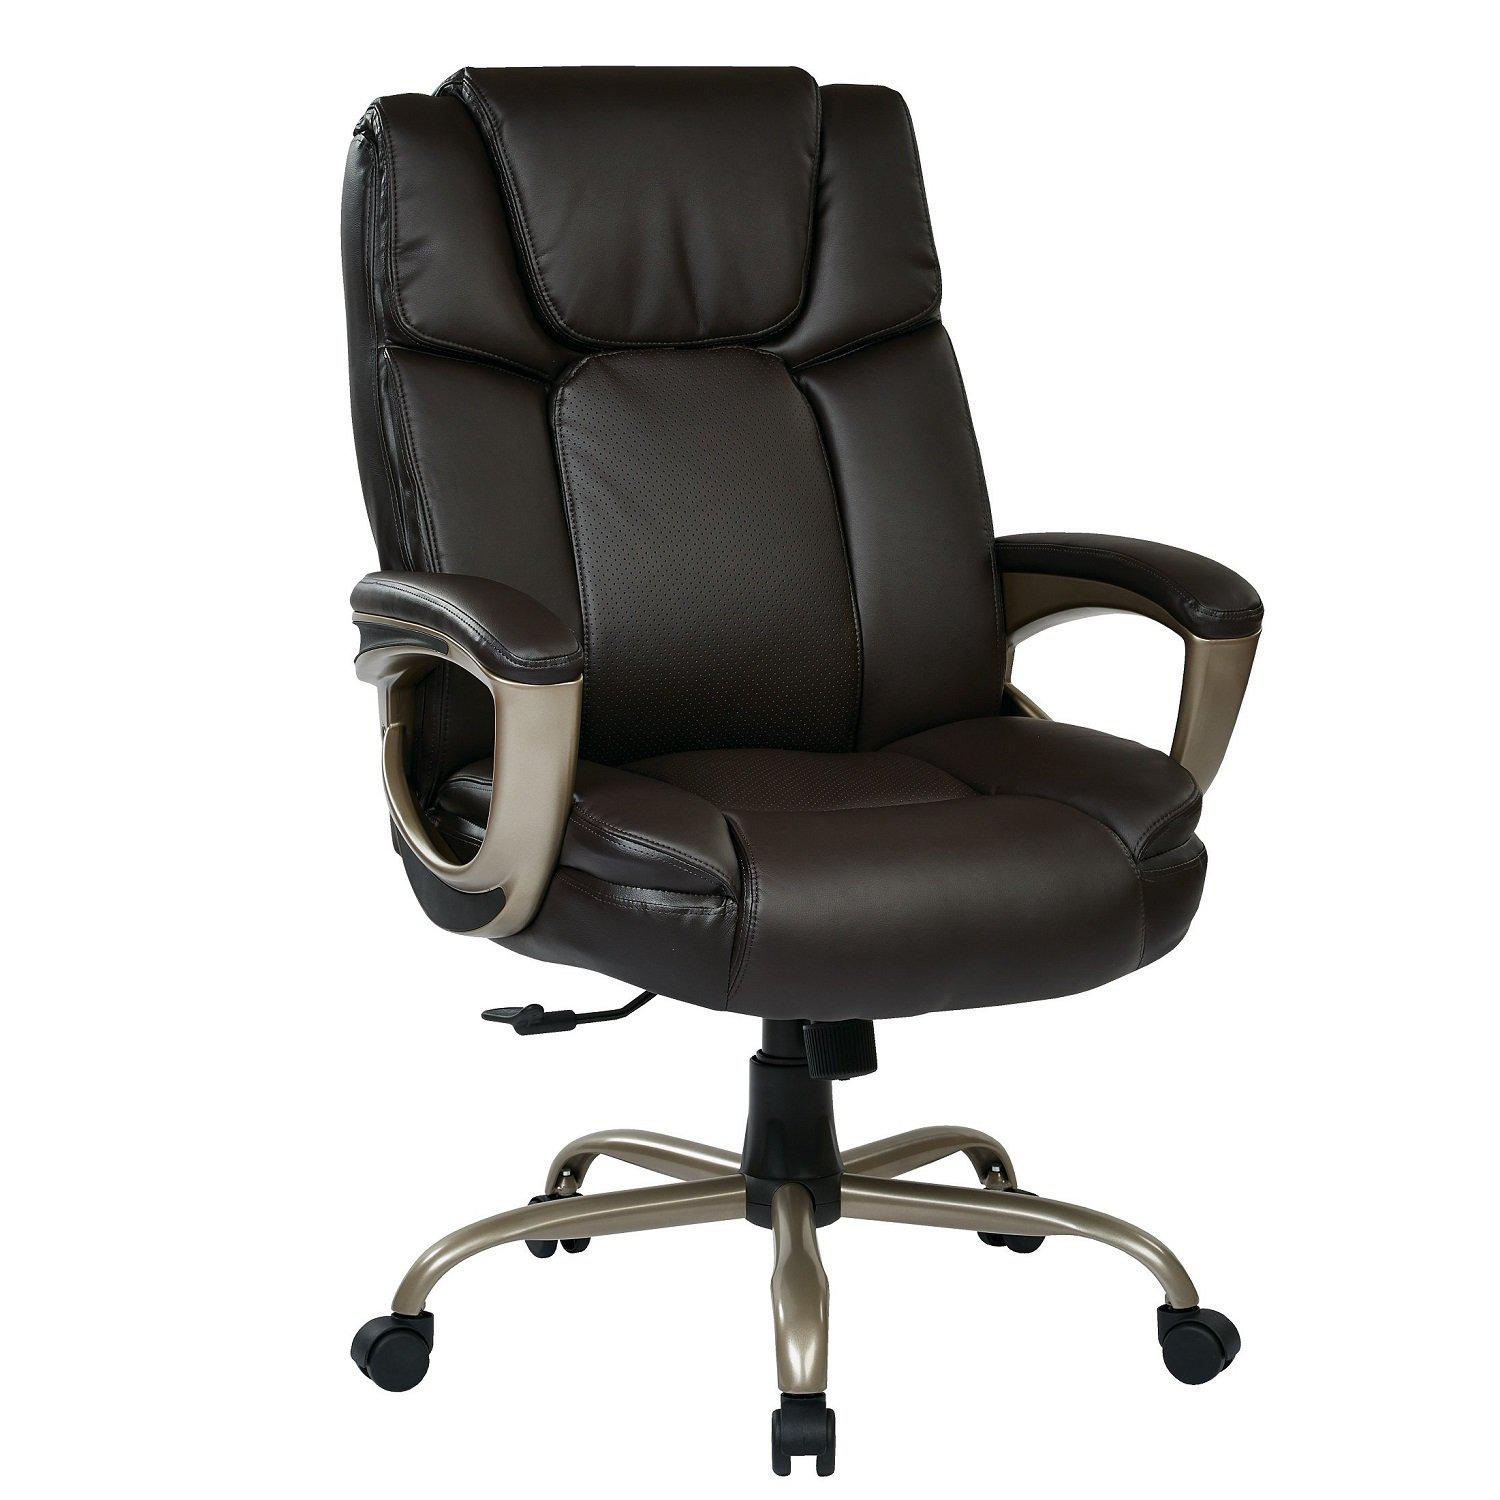 Executive Bonded Leather Big Man's Chair with Coated Padded Loop Arms and Cocoa Metal Base